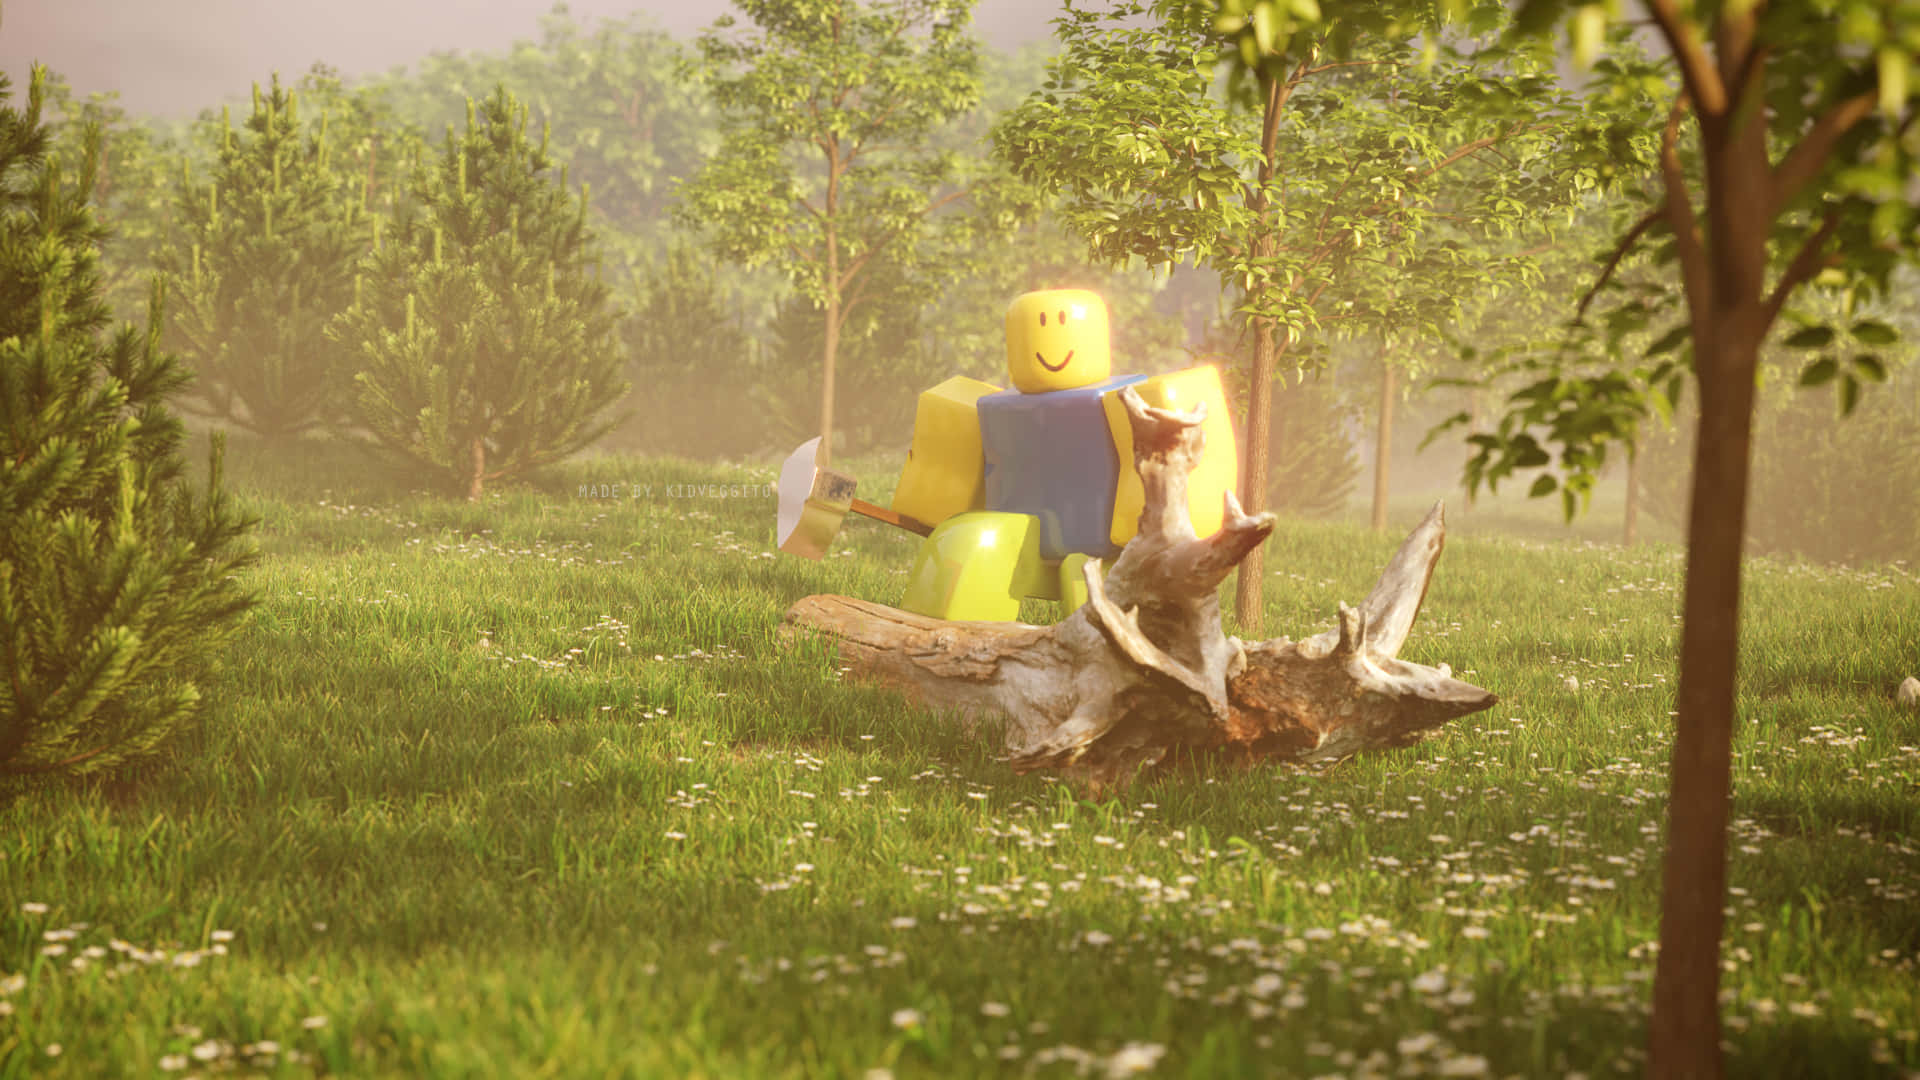 A Lego Man Is Standing In A Field With Trees Wallpaper